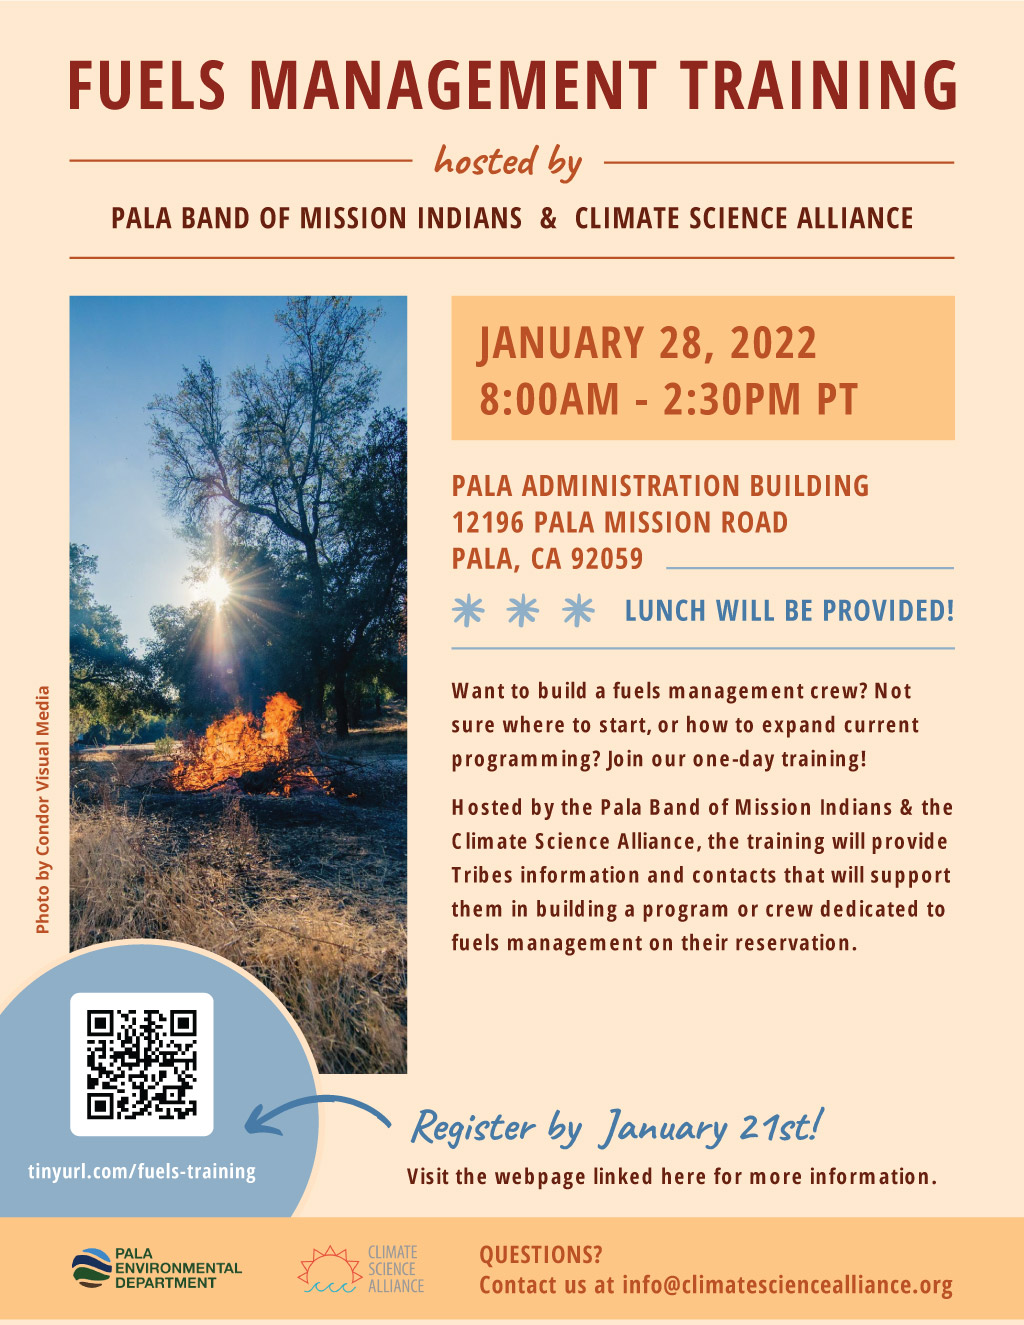 Pala Band of Mission Indians PBMI California Pala Environmental Department PED Climate Science Alliance Training